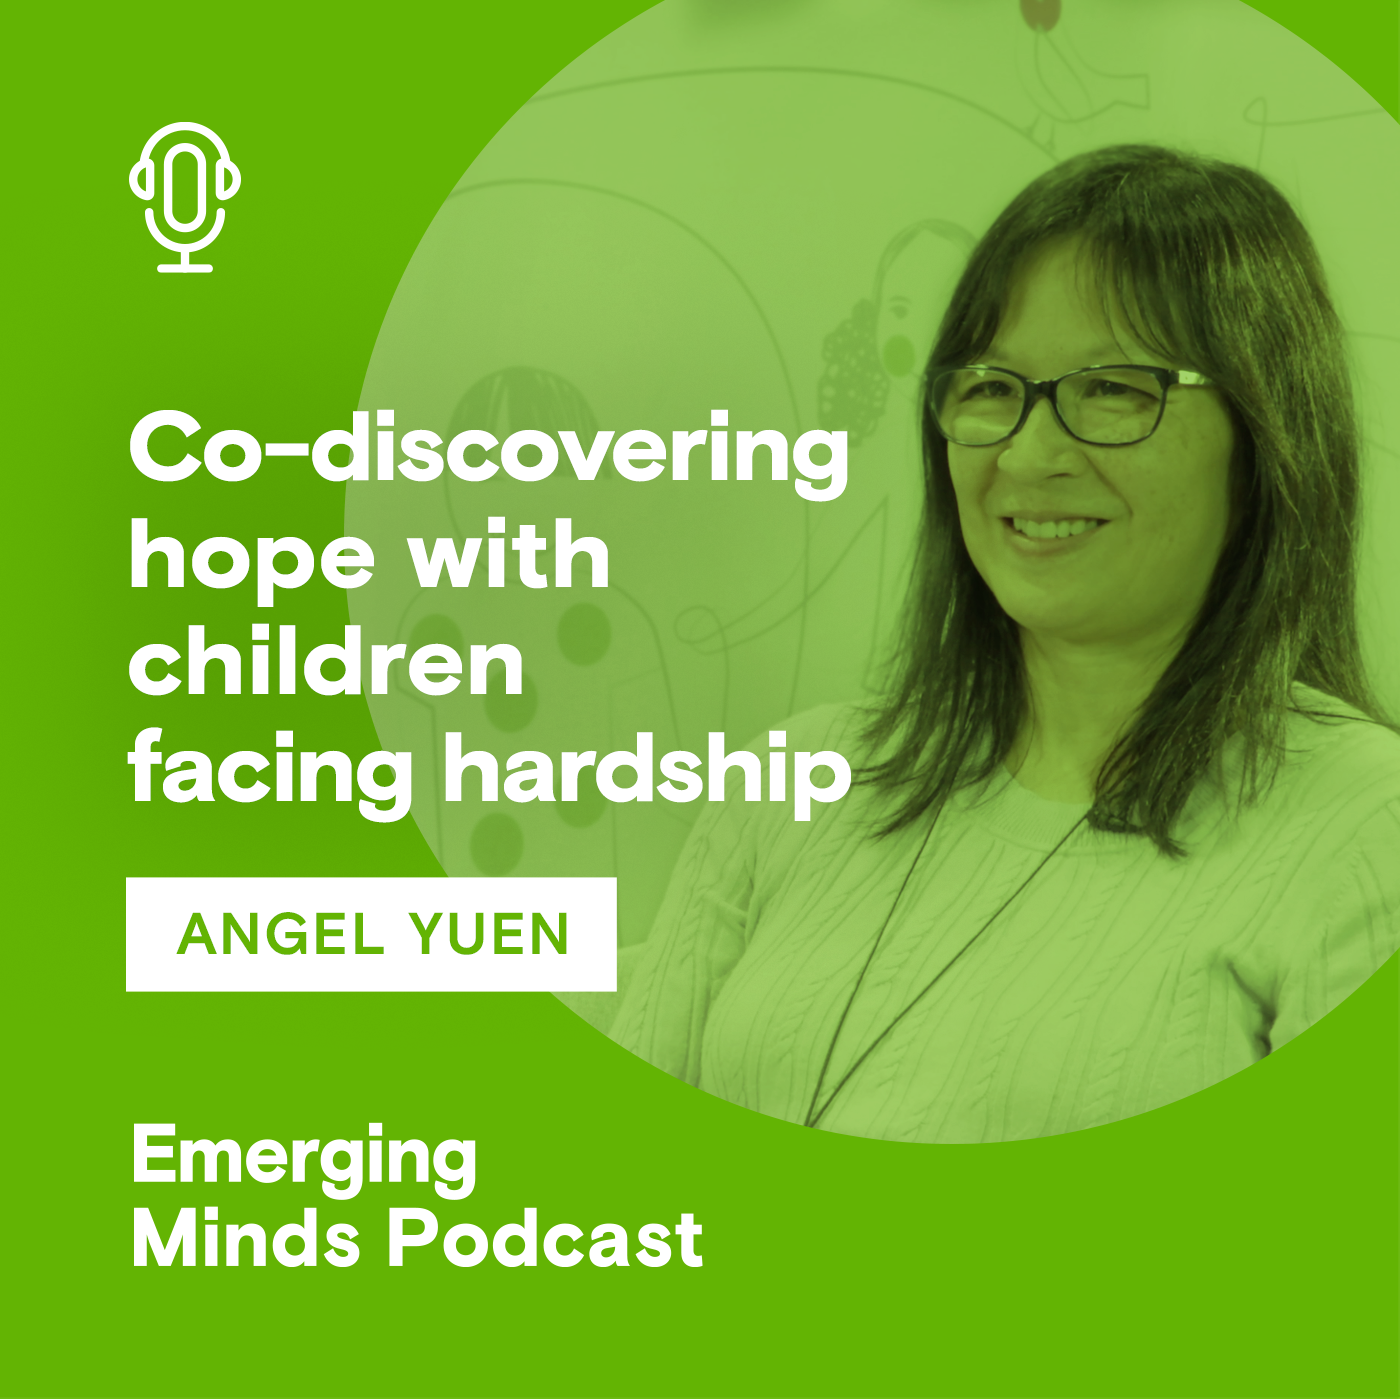 Co-discovering hope with children facing hardships